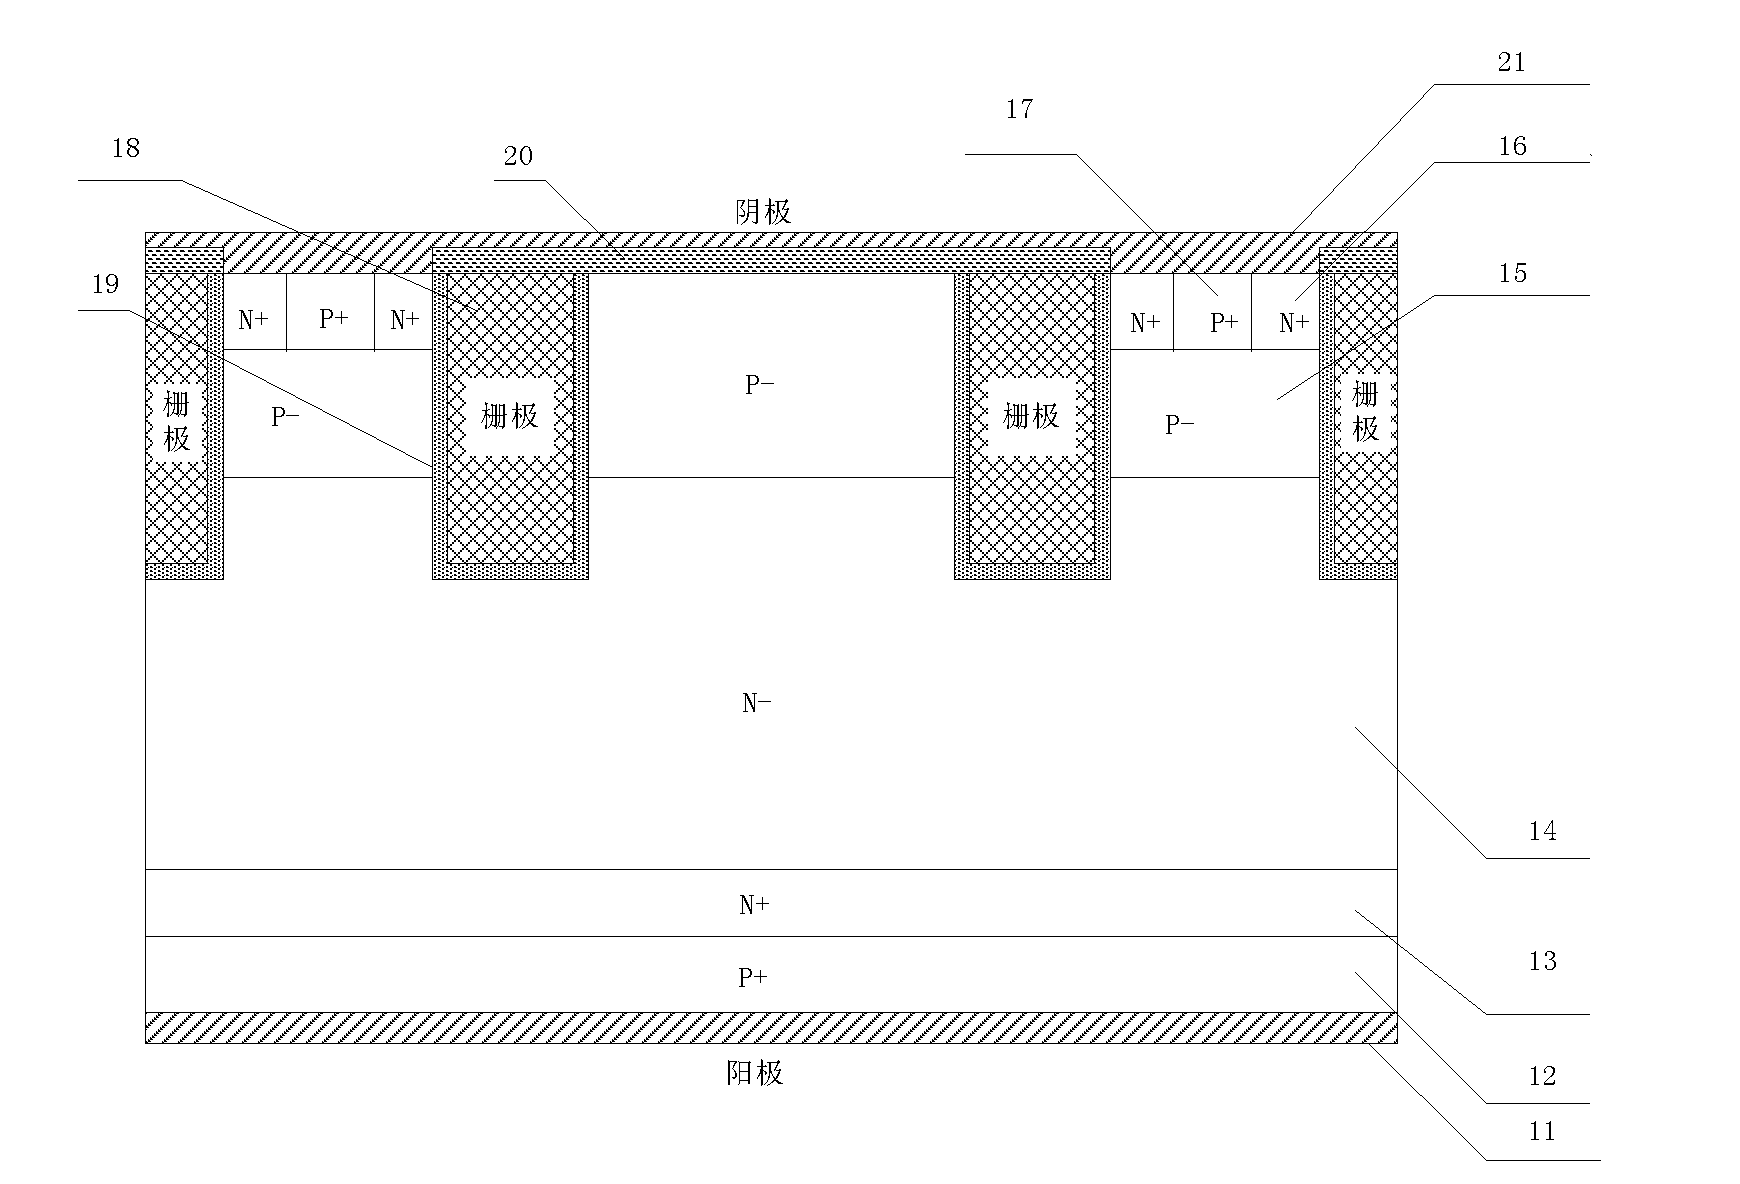 Trench-type insulated gate bipolar transistor (Trench IGBT) with enhanced internal conductivity modulation